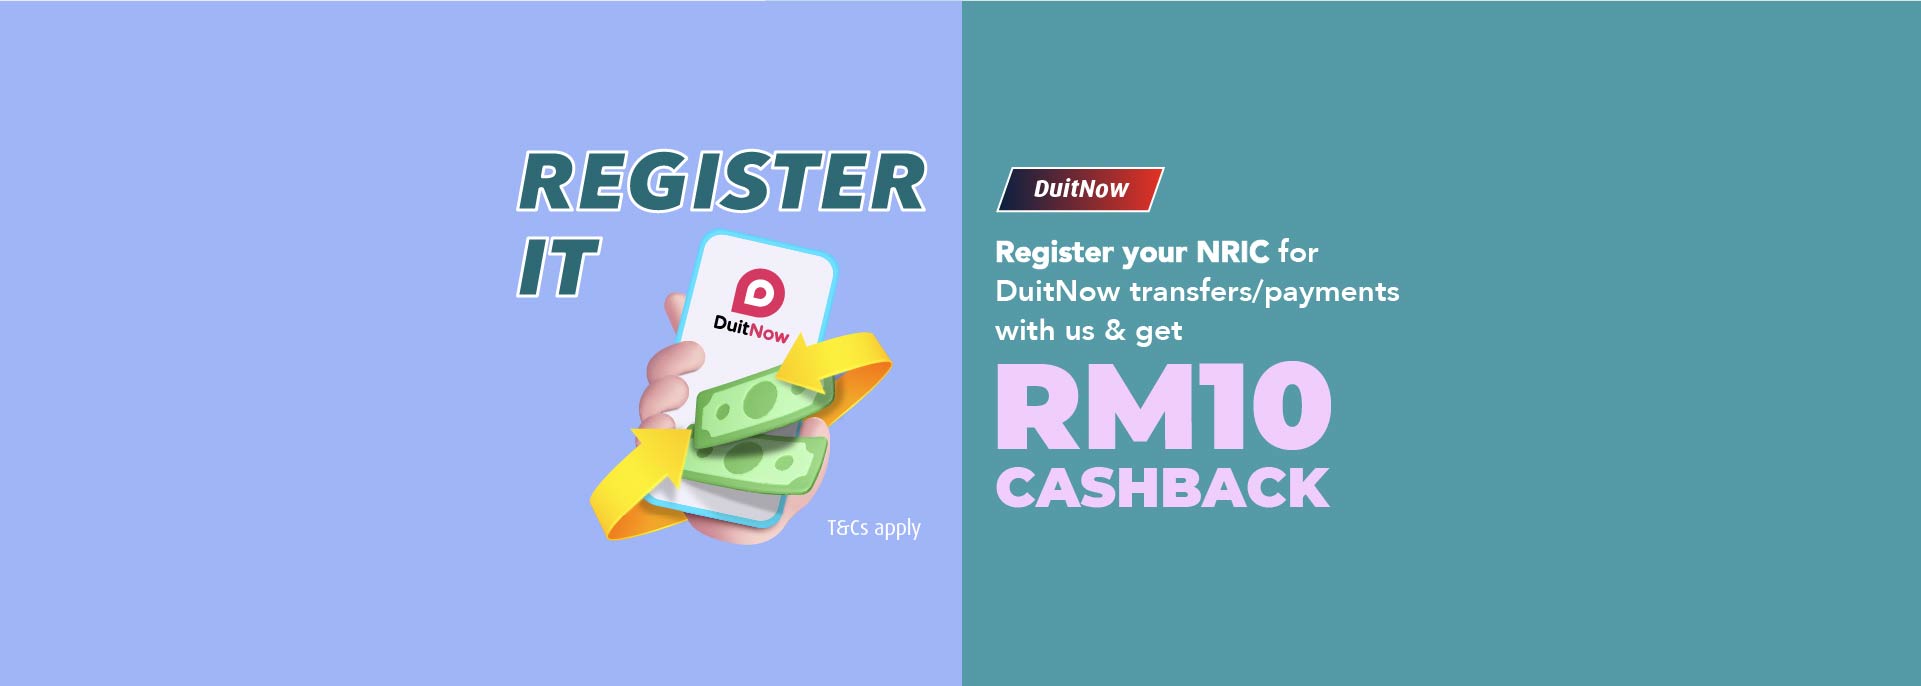 Register your NRIC as a DuitNow ID to receive funds & get RM10 Cashback. Just HLB Connect It.